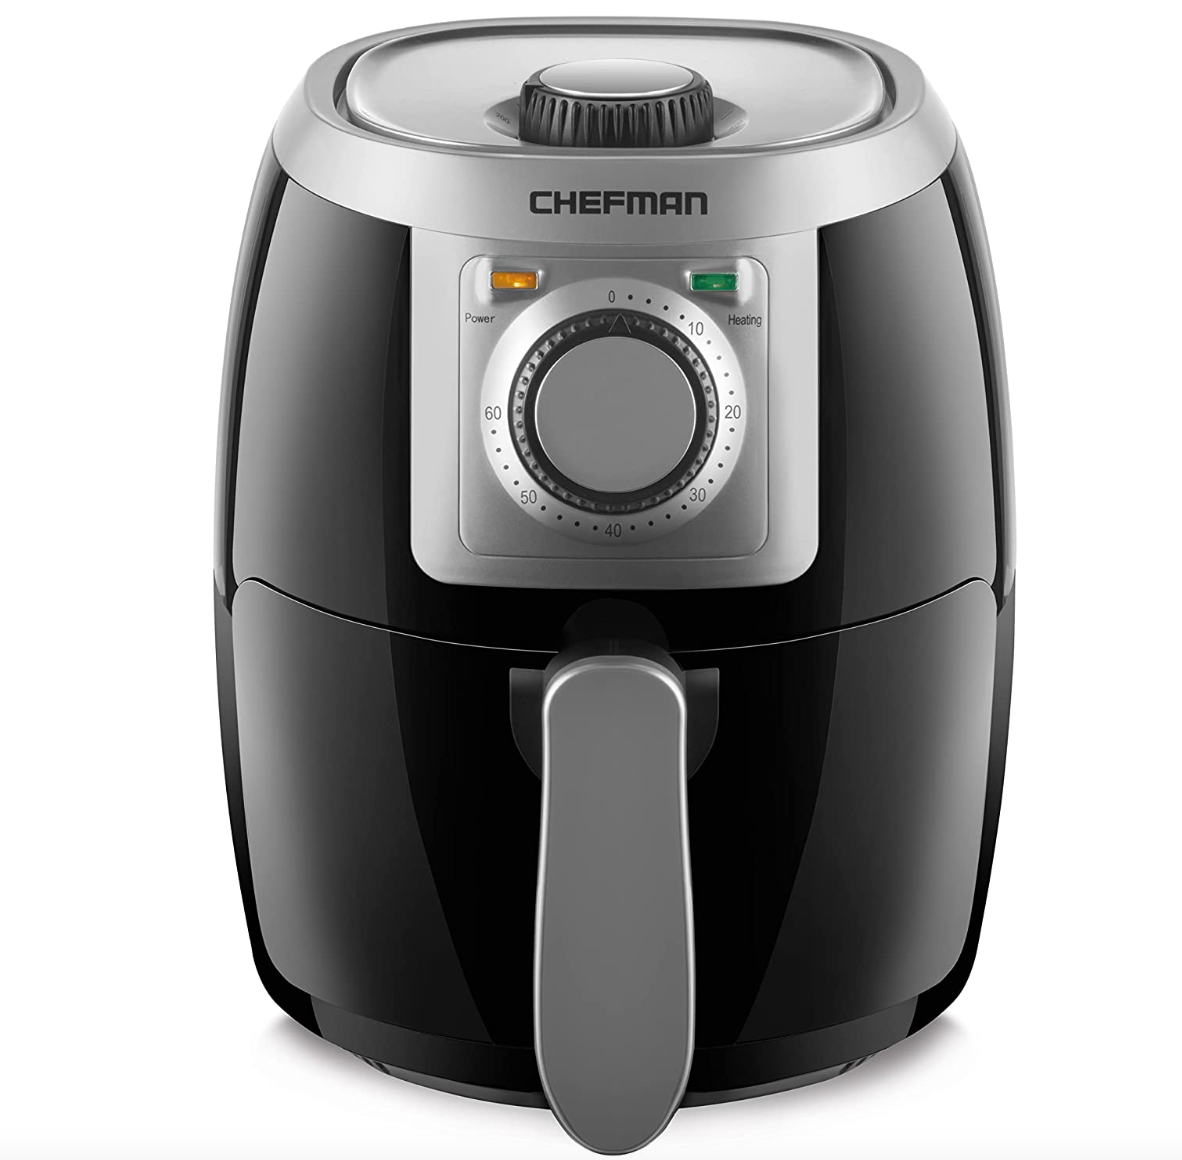 The Best Air Fryer Deals for 's October Prime Day 2022